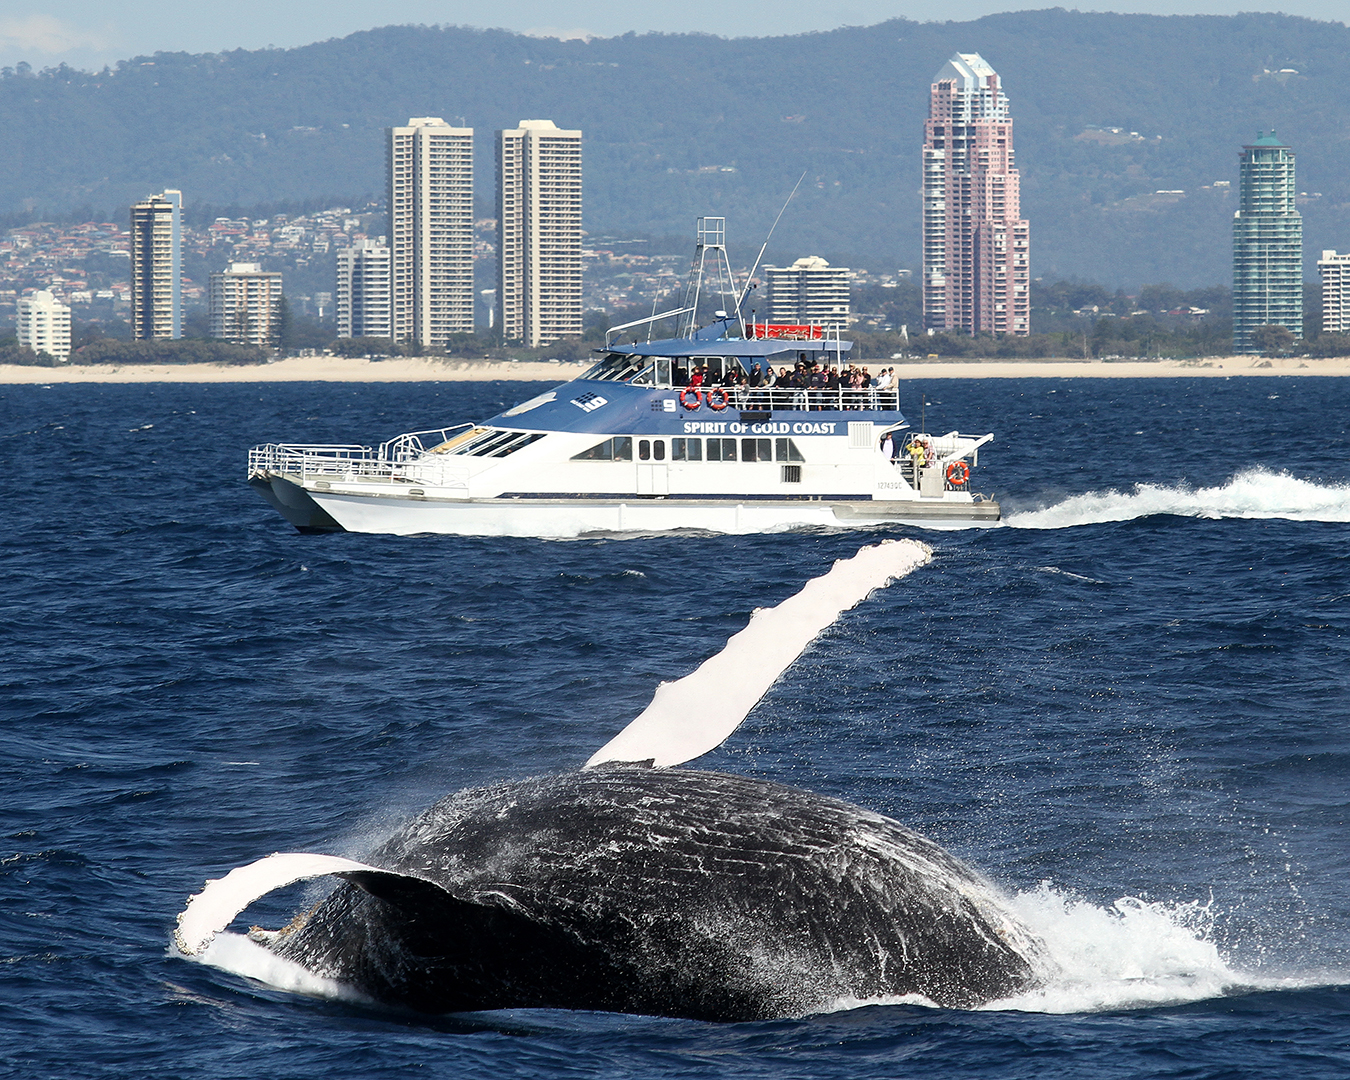 A whale breaching over the water, with a whale watching boat in the distance.